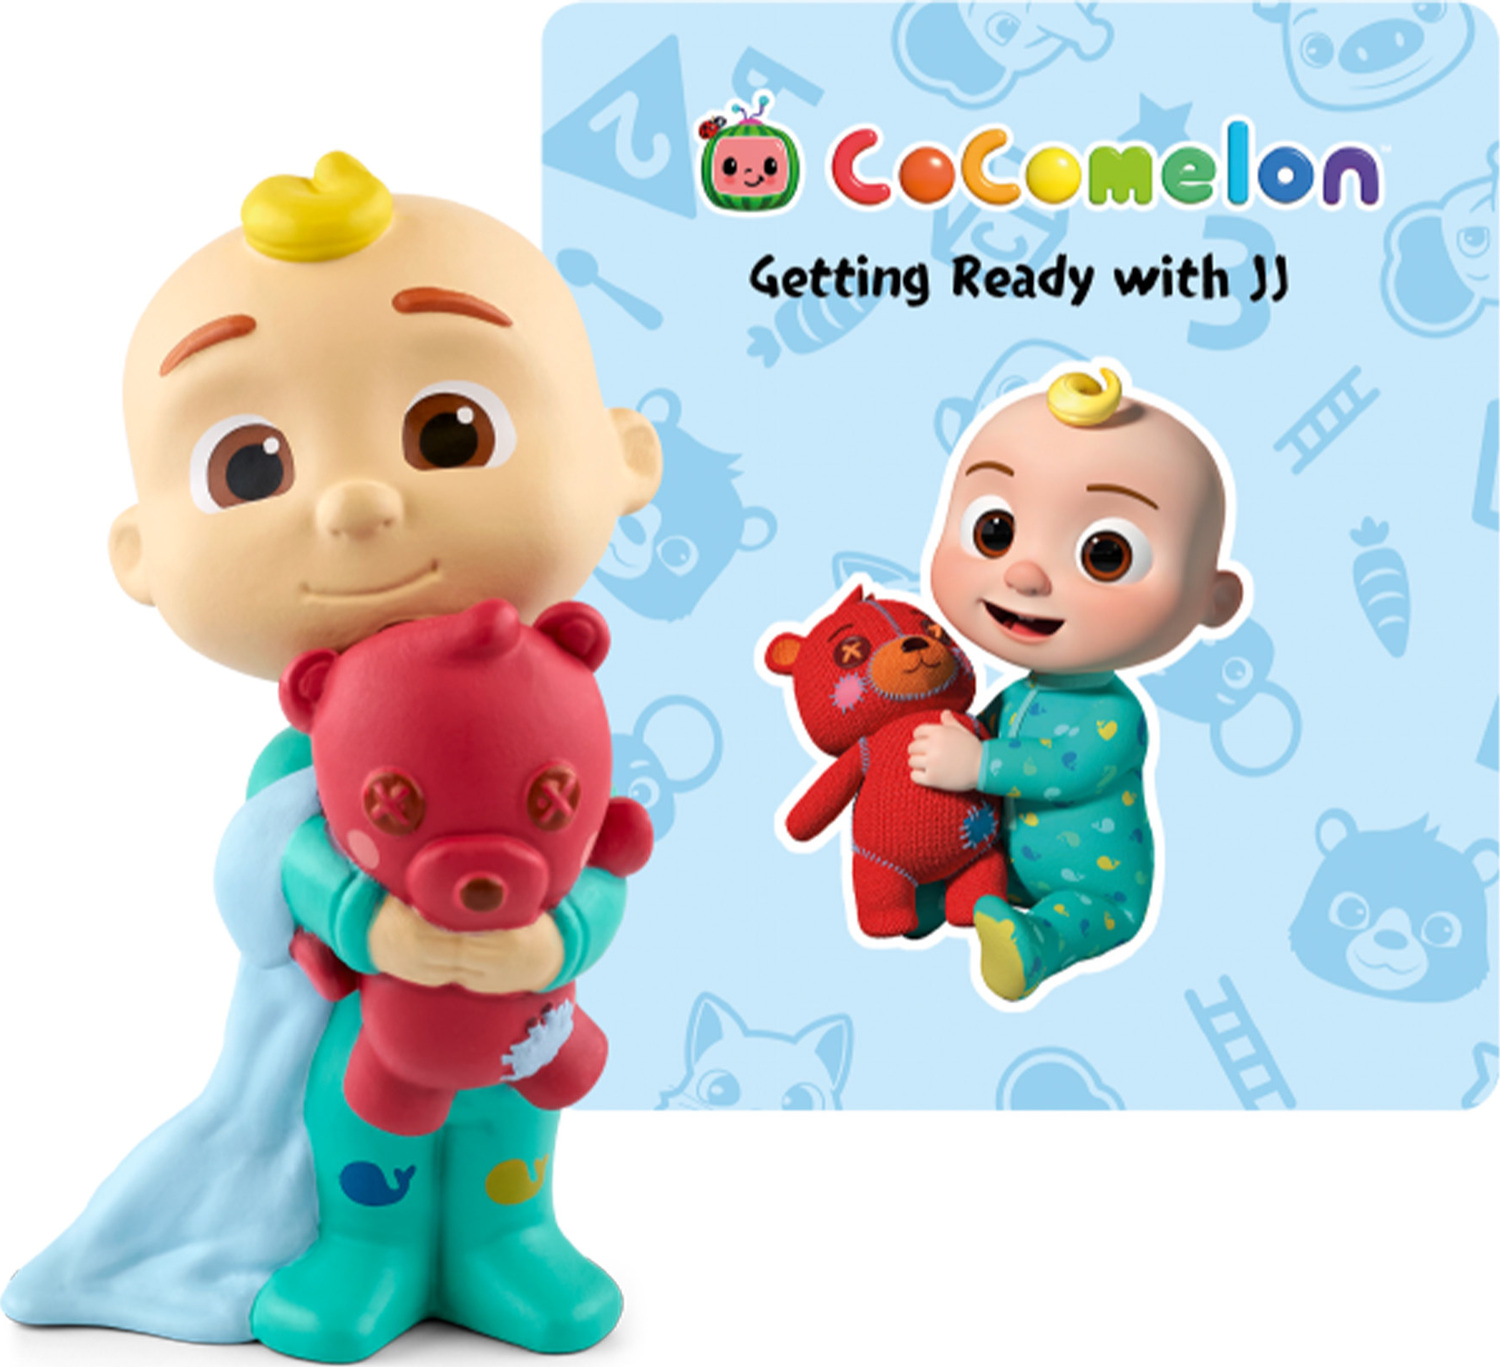 tonies - CoComelon: Getting Ready with JJ - Kiddlestix Toys